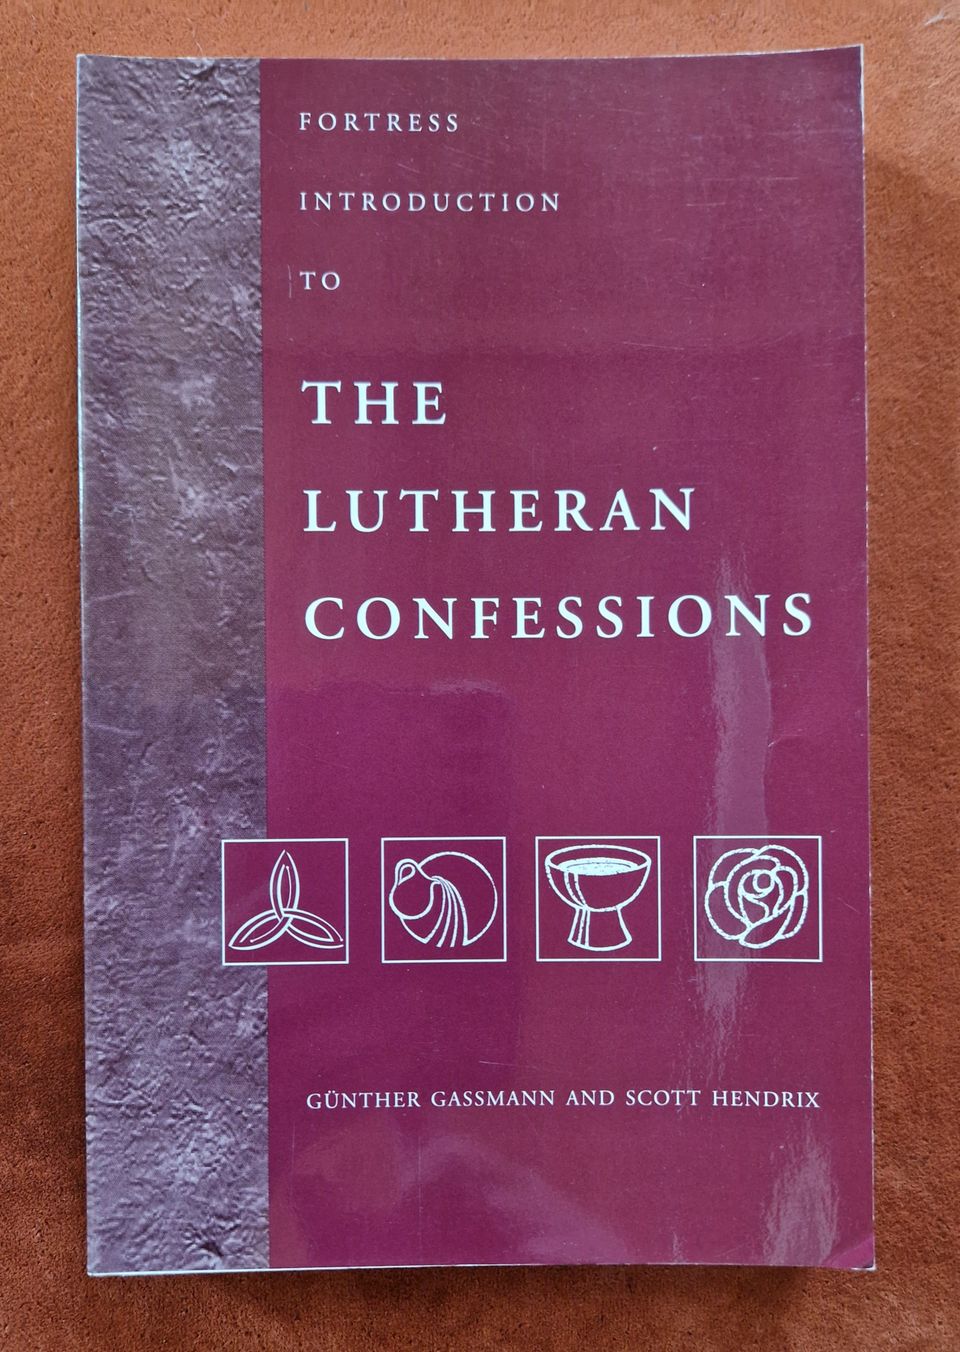 Gassman  & Hendrix: Fortress Introduction to The Lutheran Confessions